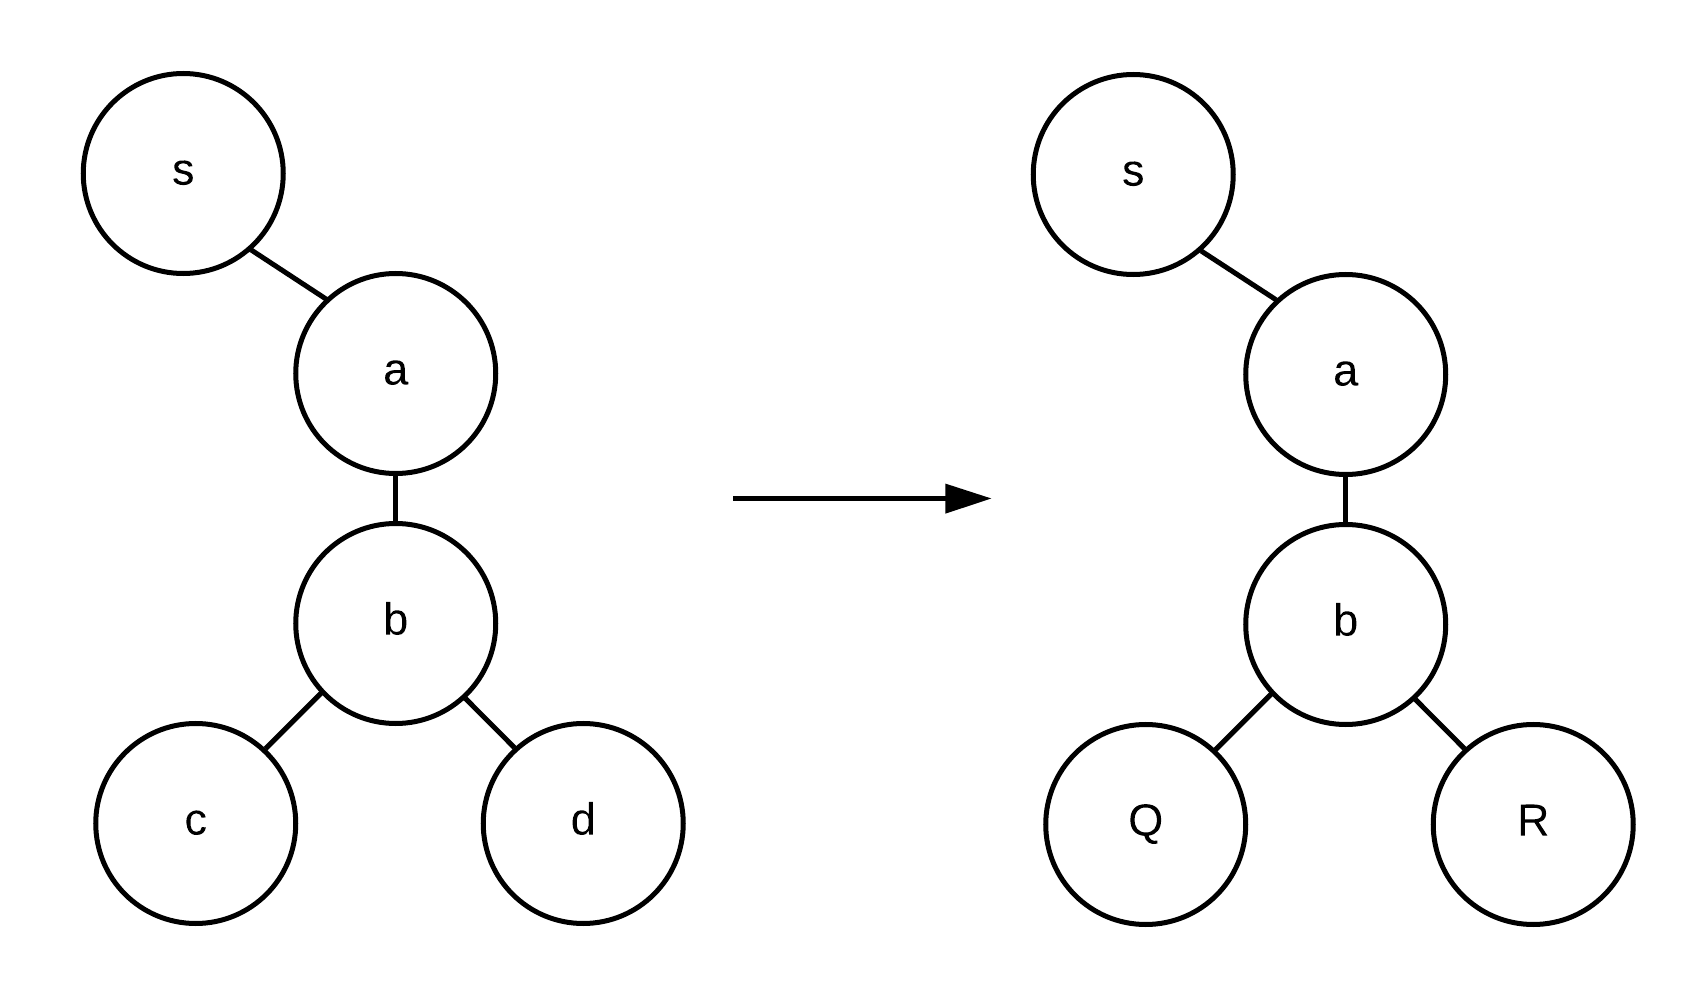 tree-structure-substituted.png